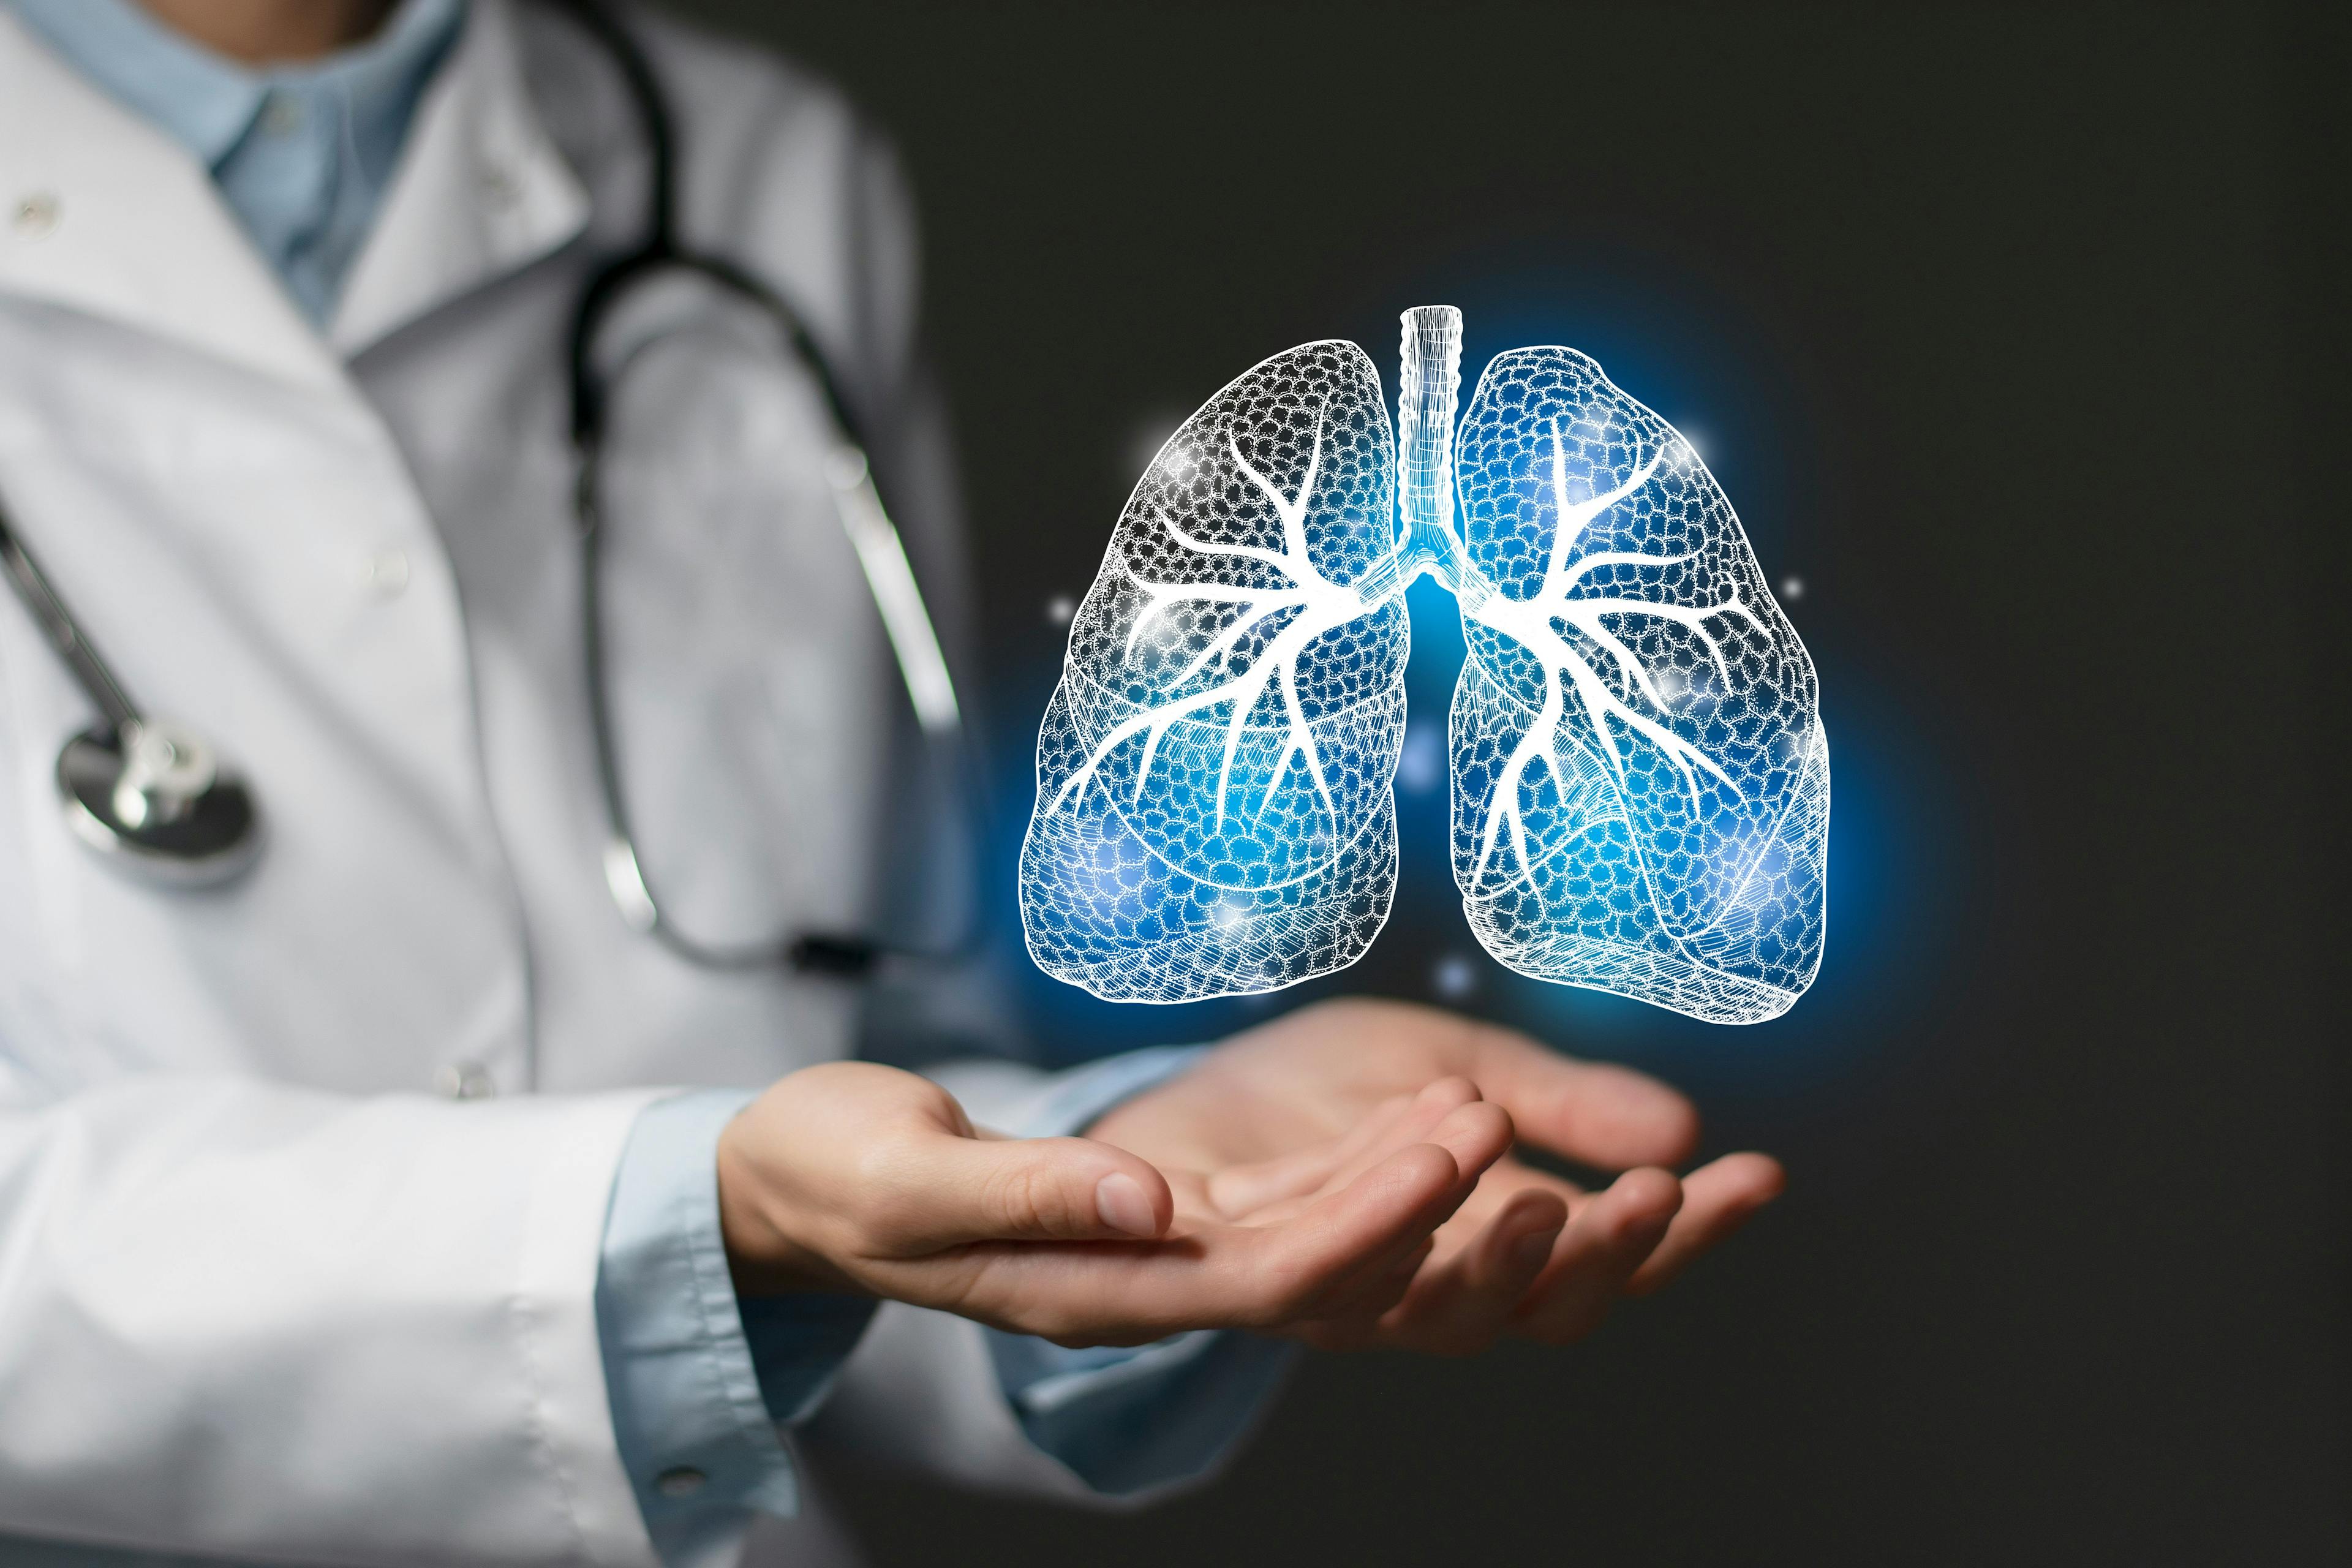 Pulmonologist doctor, lungs specialist. Aesthetic handdrawn highlighted illustration of human lungs | Image Credit: mi_viri - stock.adobe.com